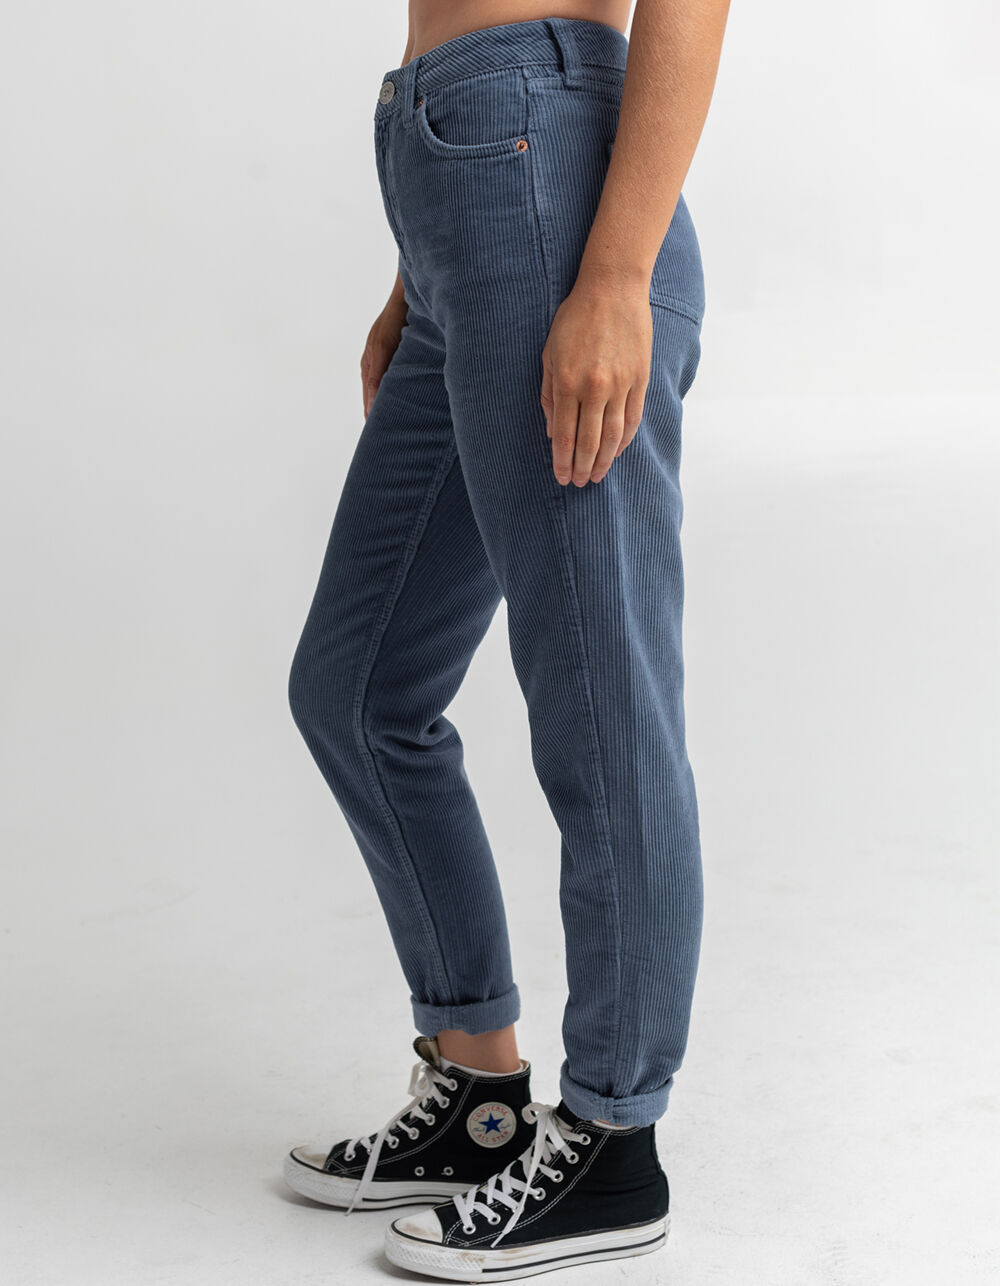 BDG Urban Outfitters Corduroy Mom Pants